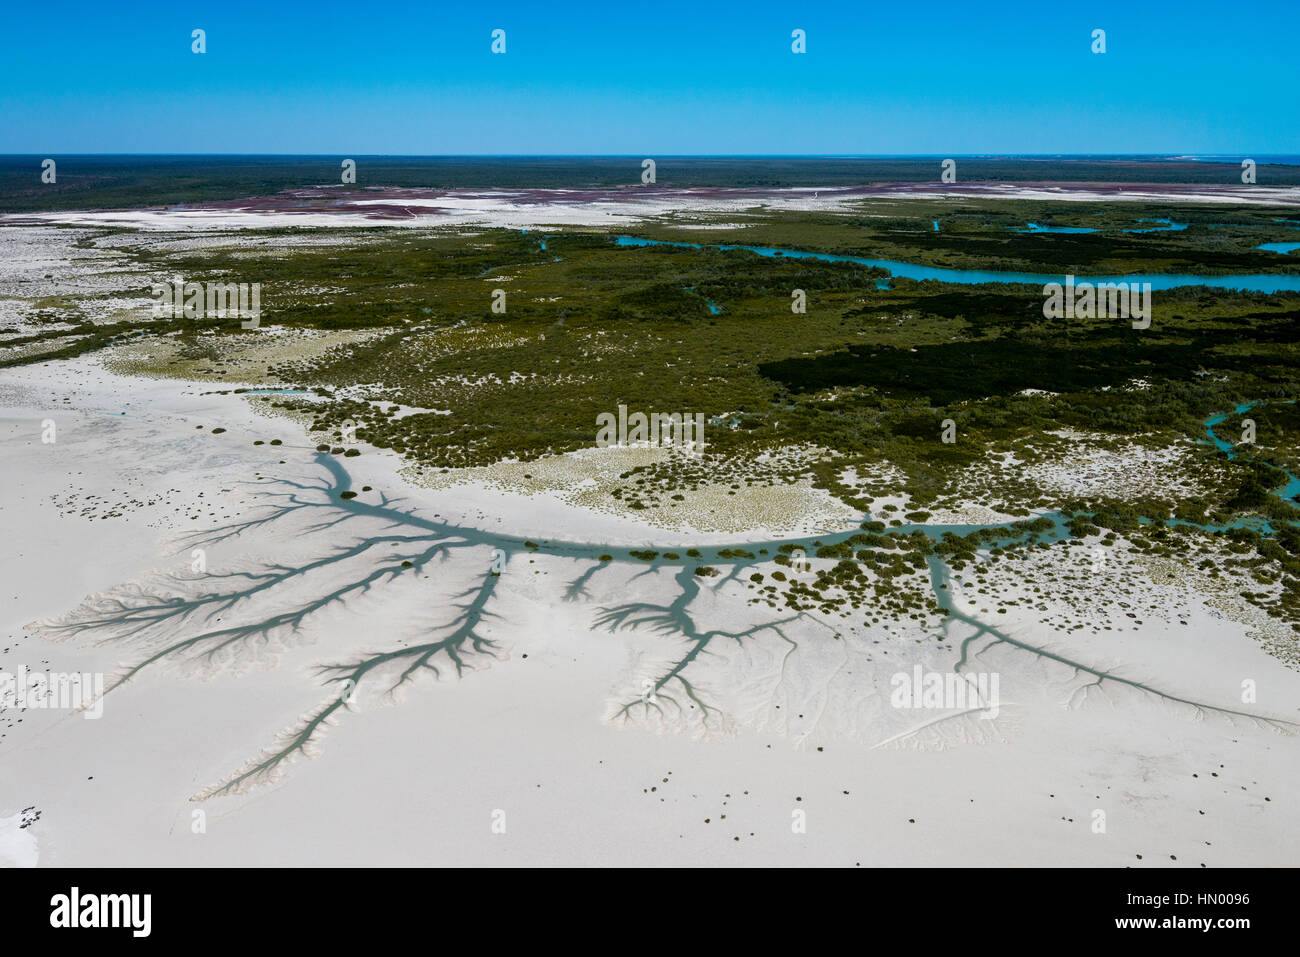 Dendritic drainage patterns in the sand of a tidal marsh at low tide. Stock Photo